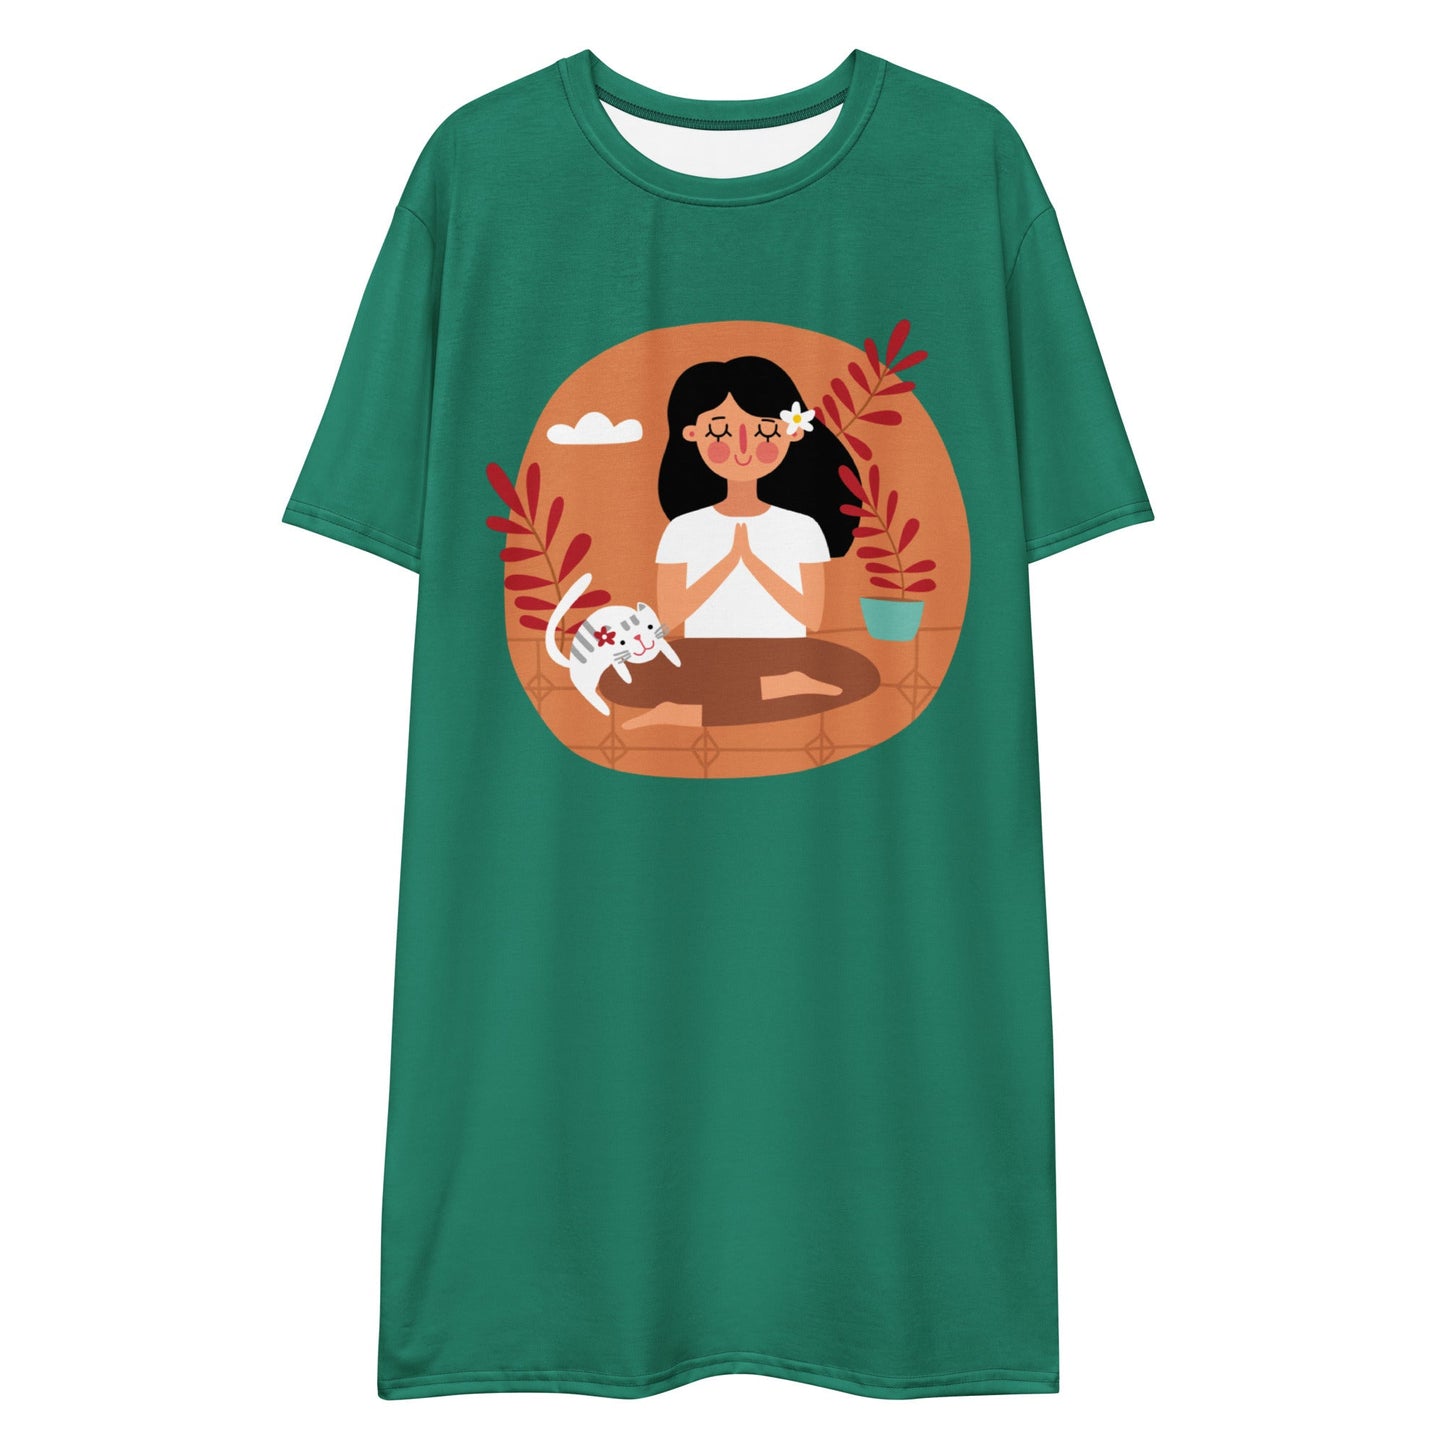 womens-t-shirt-dress-never-be-alone-forest